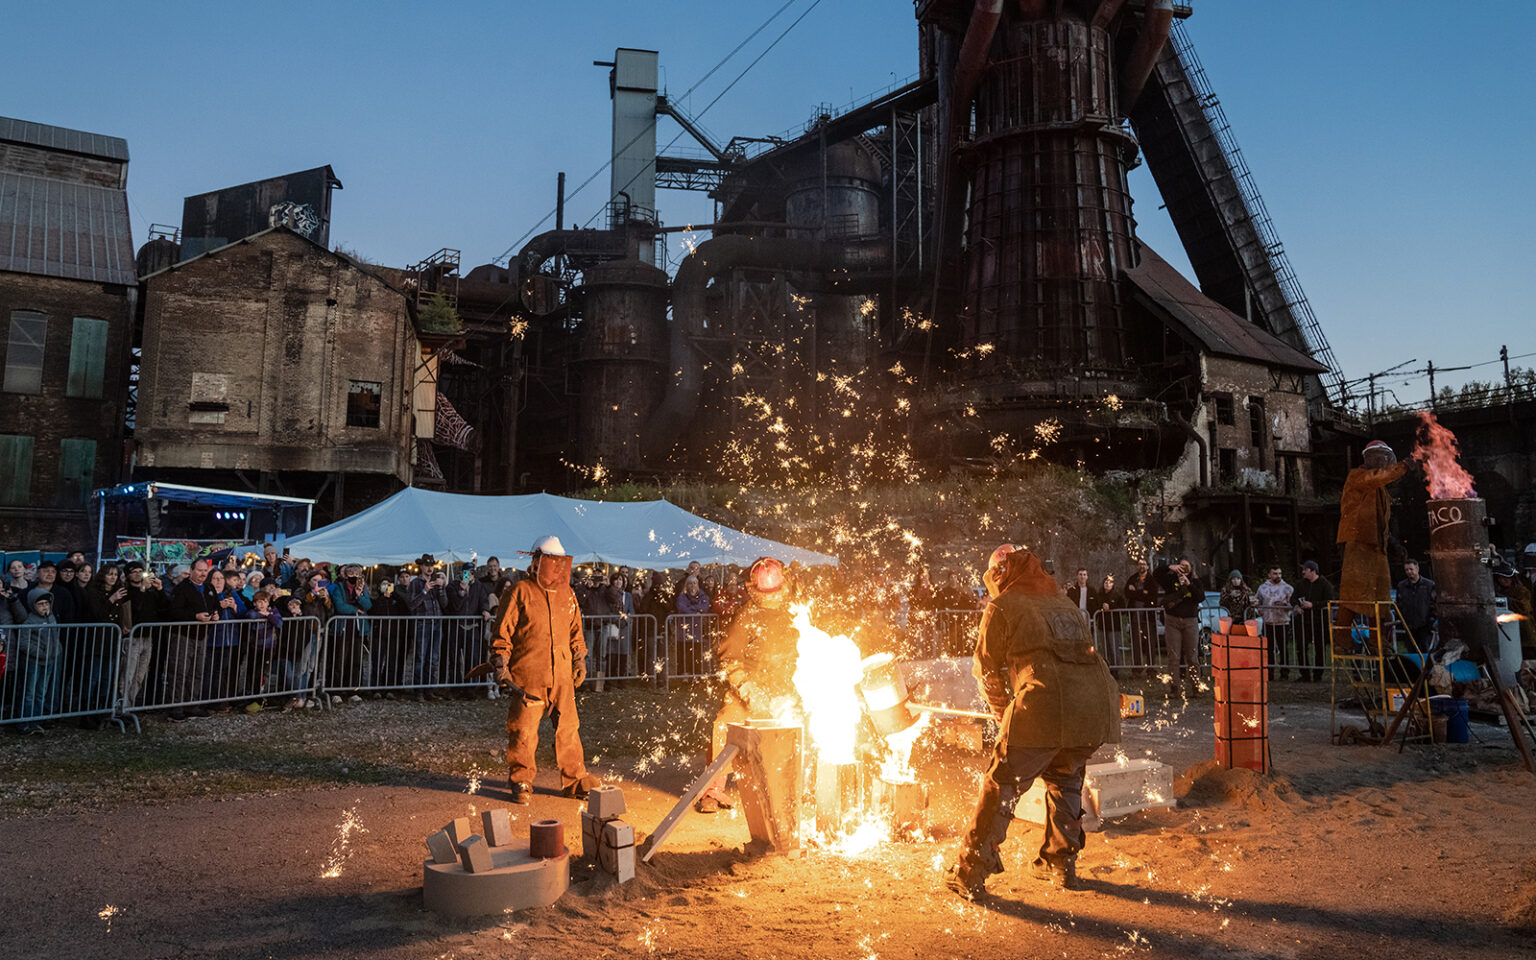 Festival of Combustion — Rivers of Steel